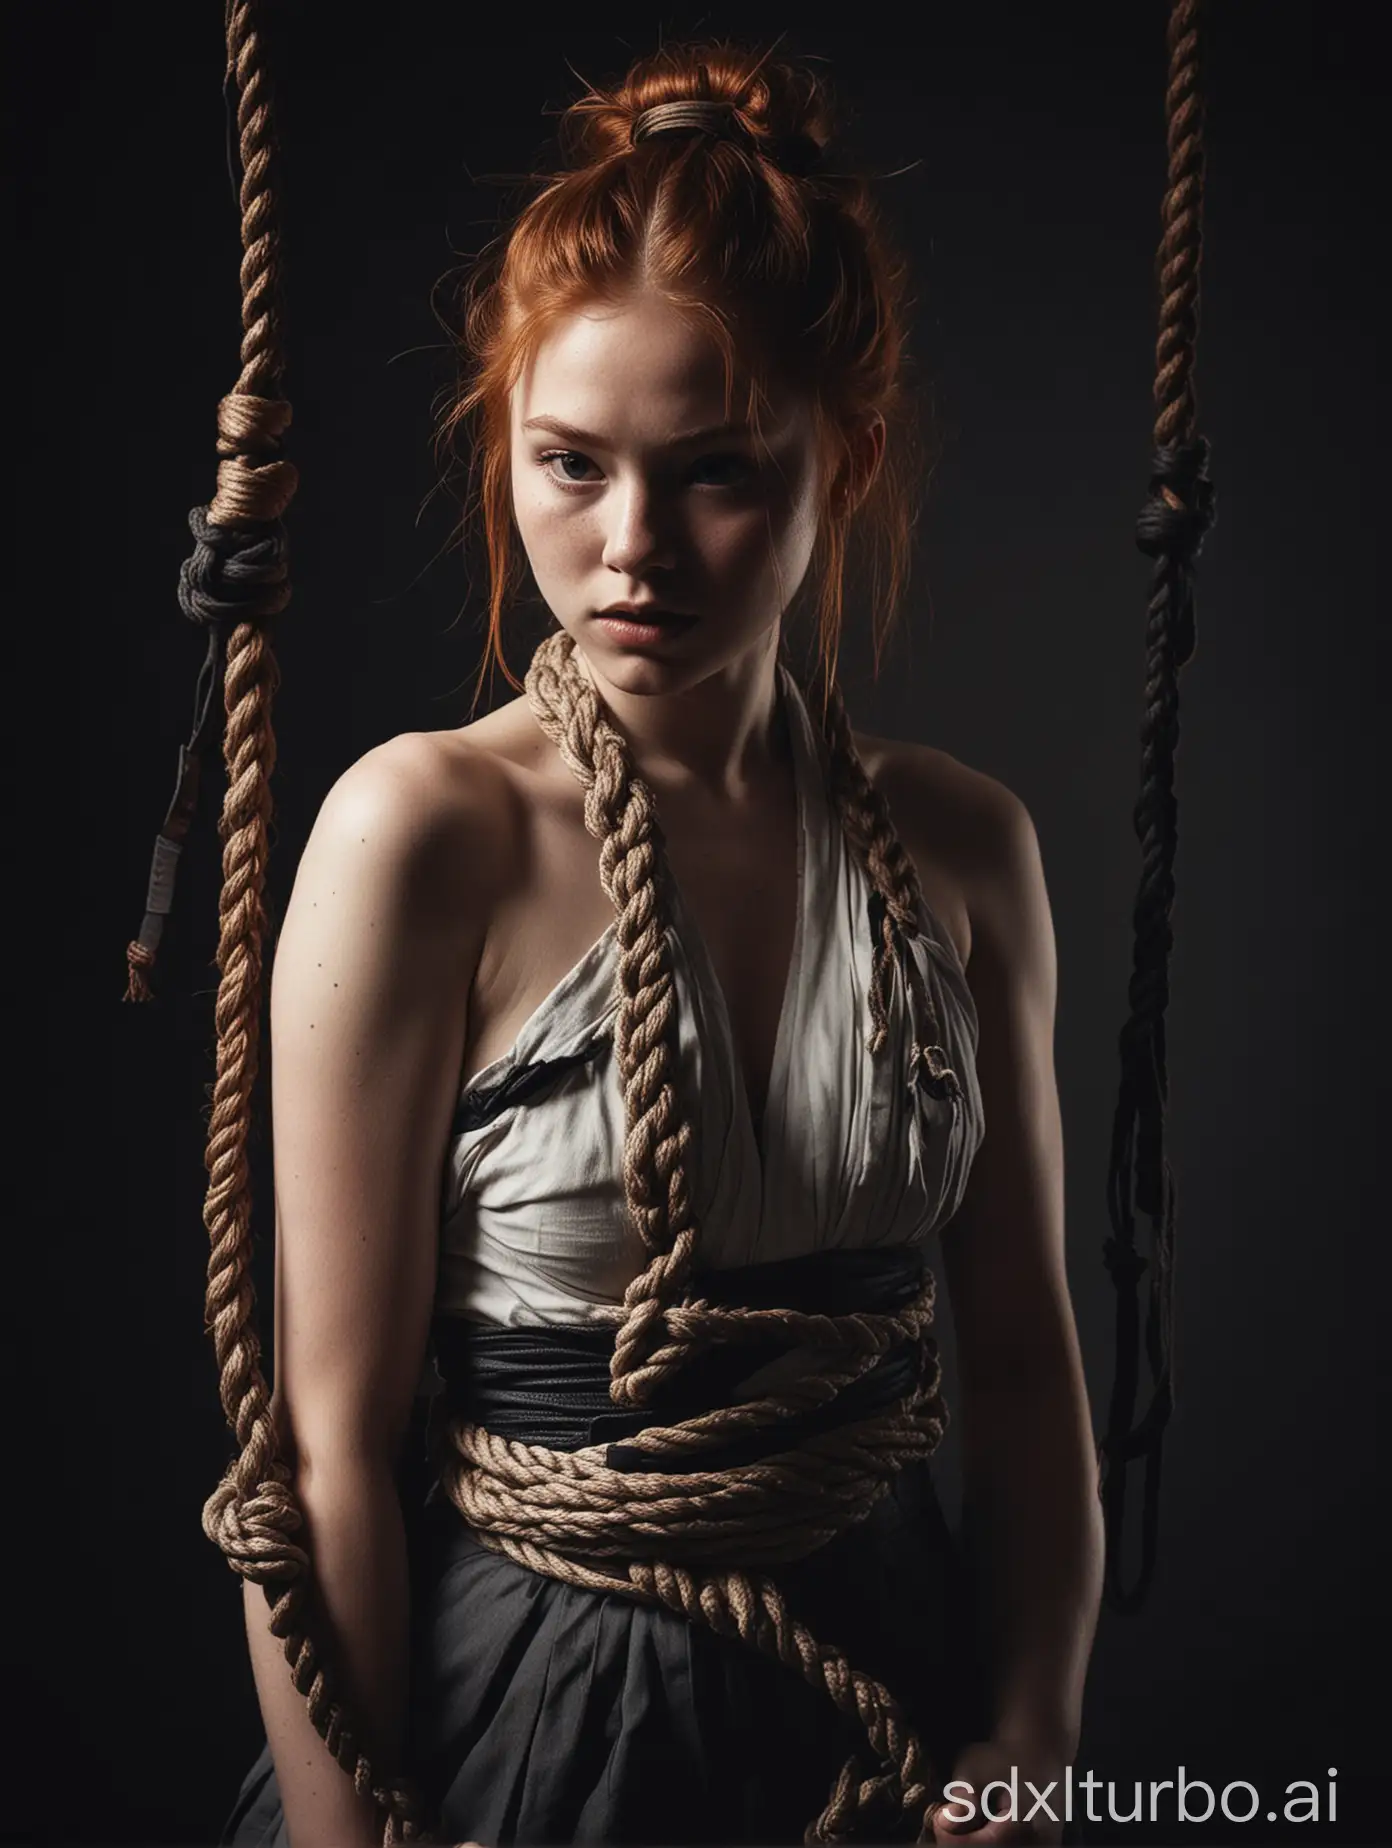 Dramatic-Shibari-Portrait-Stunning-Redhead-Woman-with-Braided-Hair-in-Japanese-Style